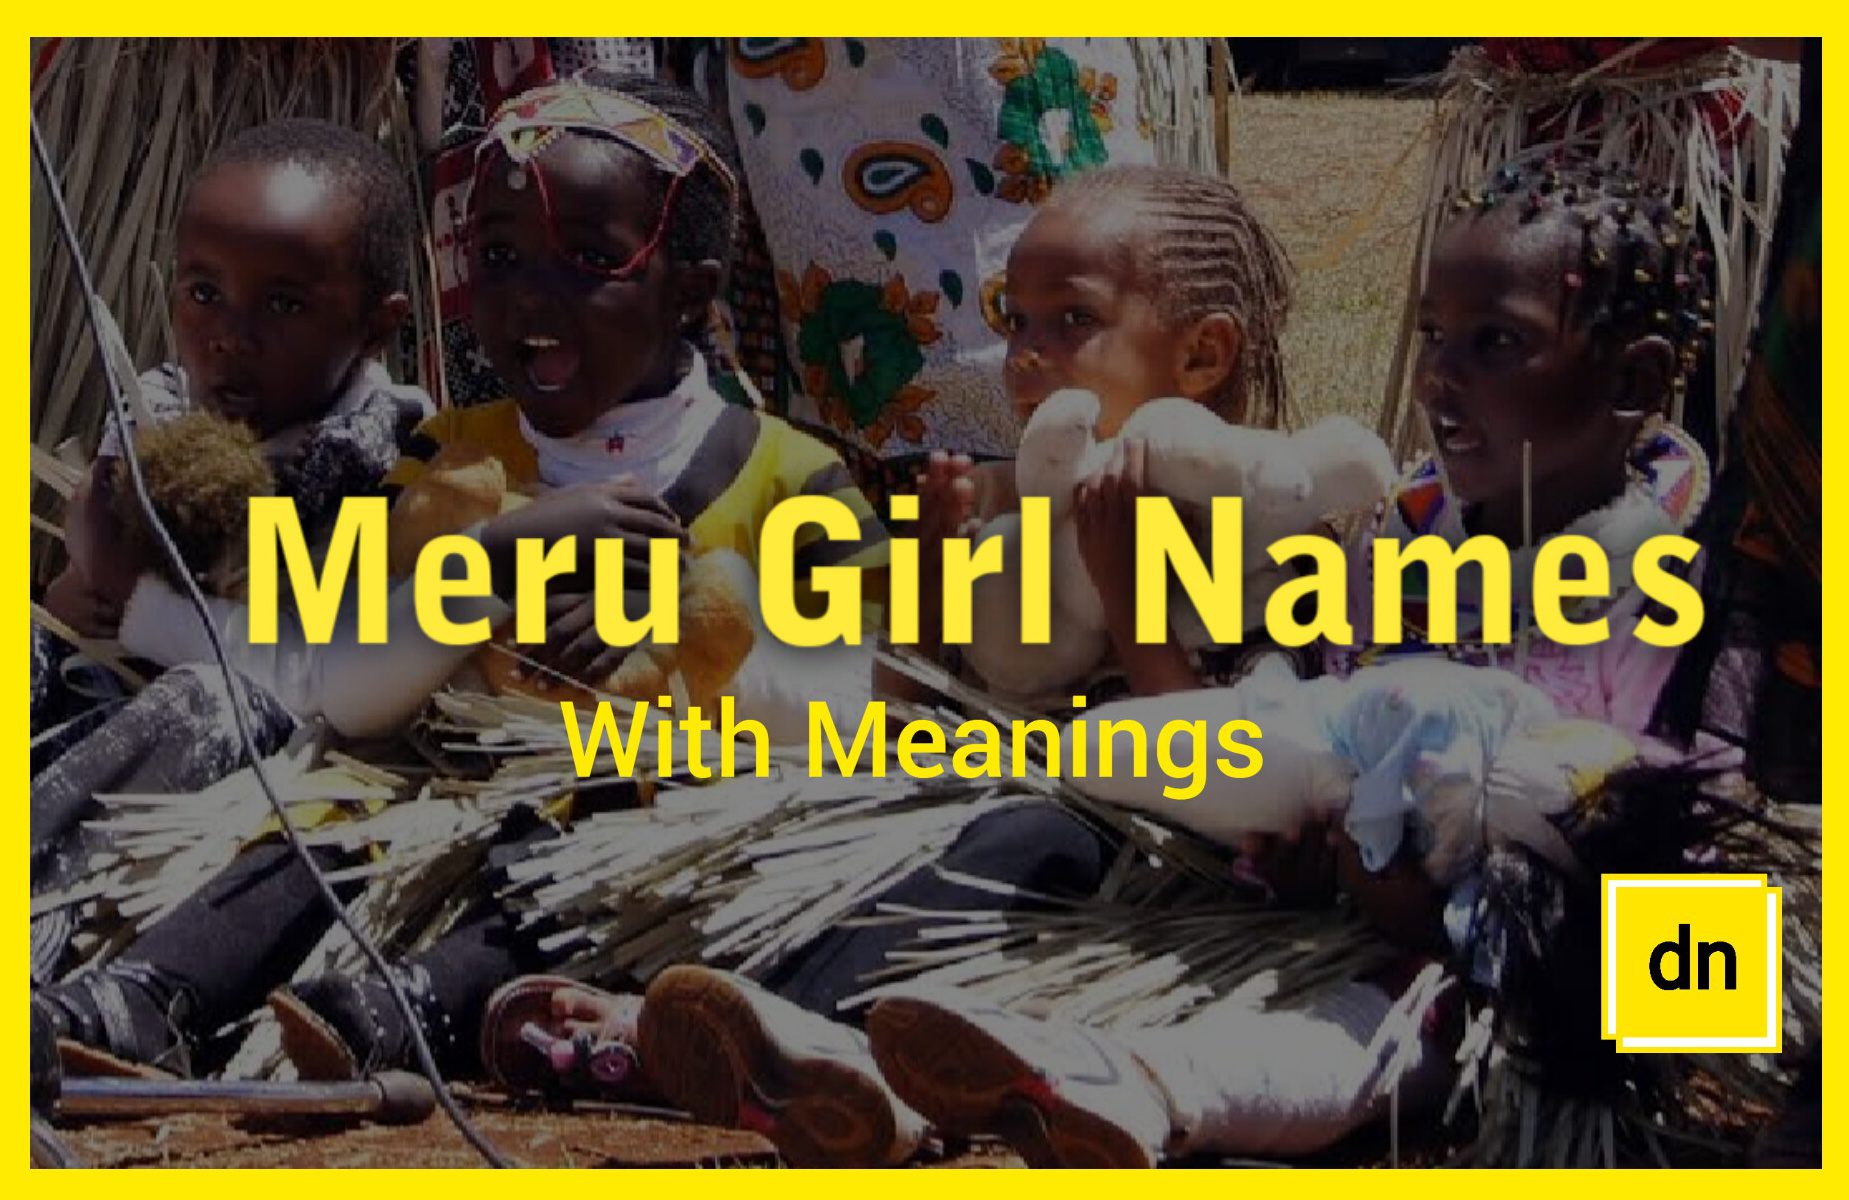 Meru Girl Names with meanings